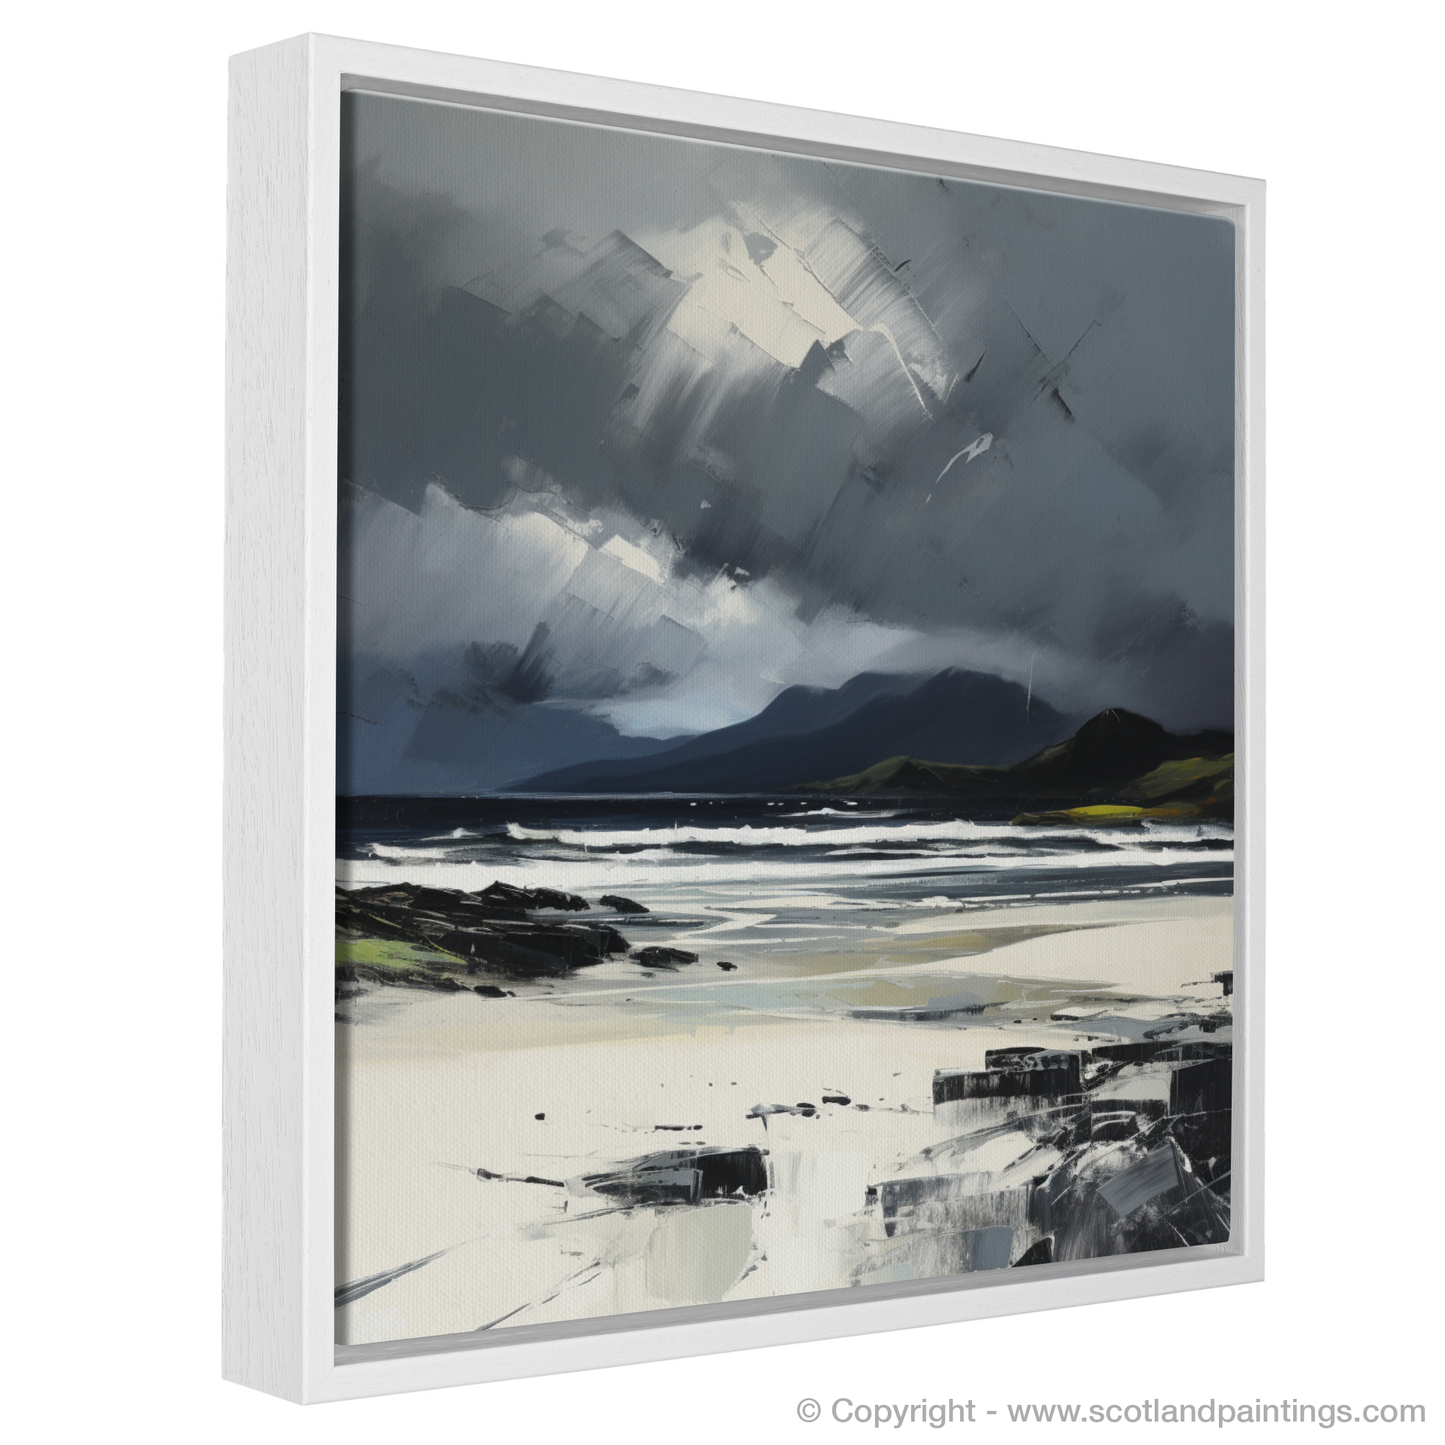 Painting and Art Print of Camusdarach Beach with a stormy sky entitled "Stormy Serenade at Camusdarach Beach".